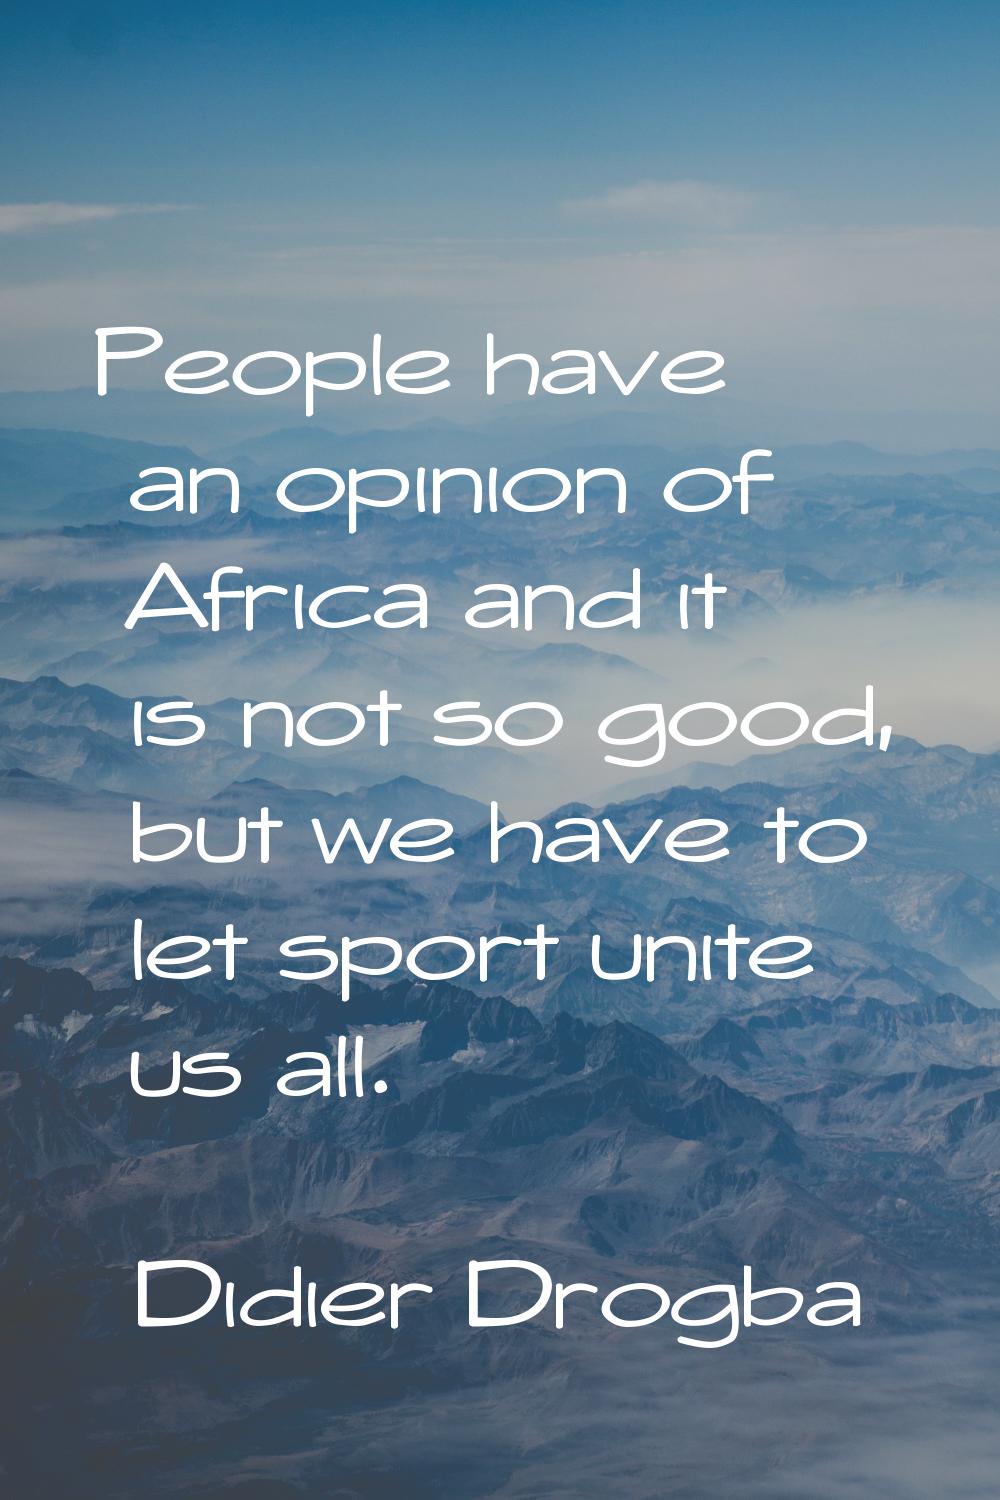 People have an opinion of Africa and it is not so good, but we have to let sport unite us all.